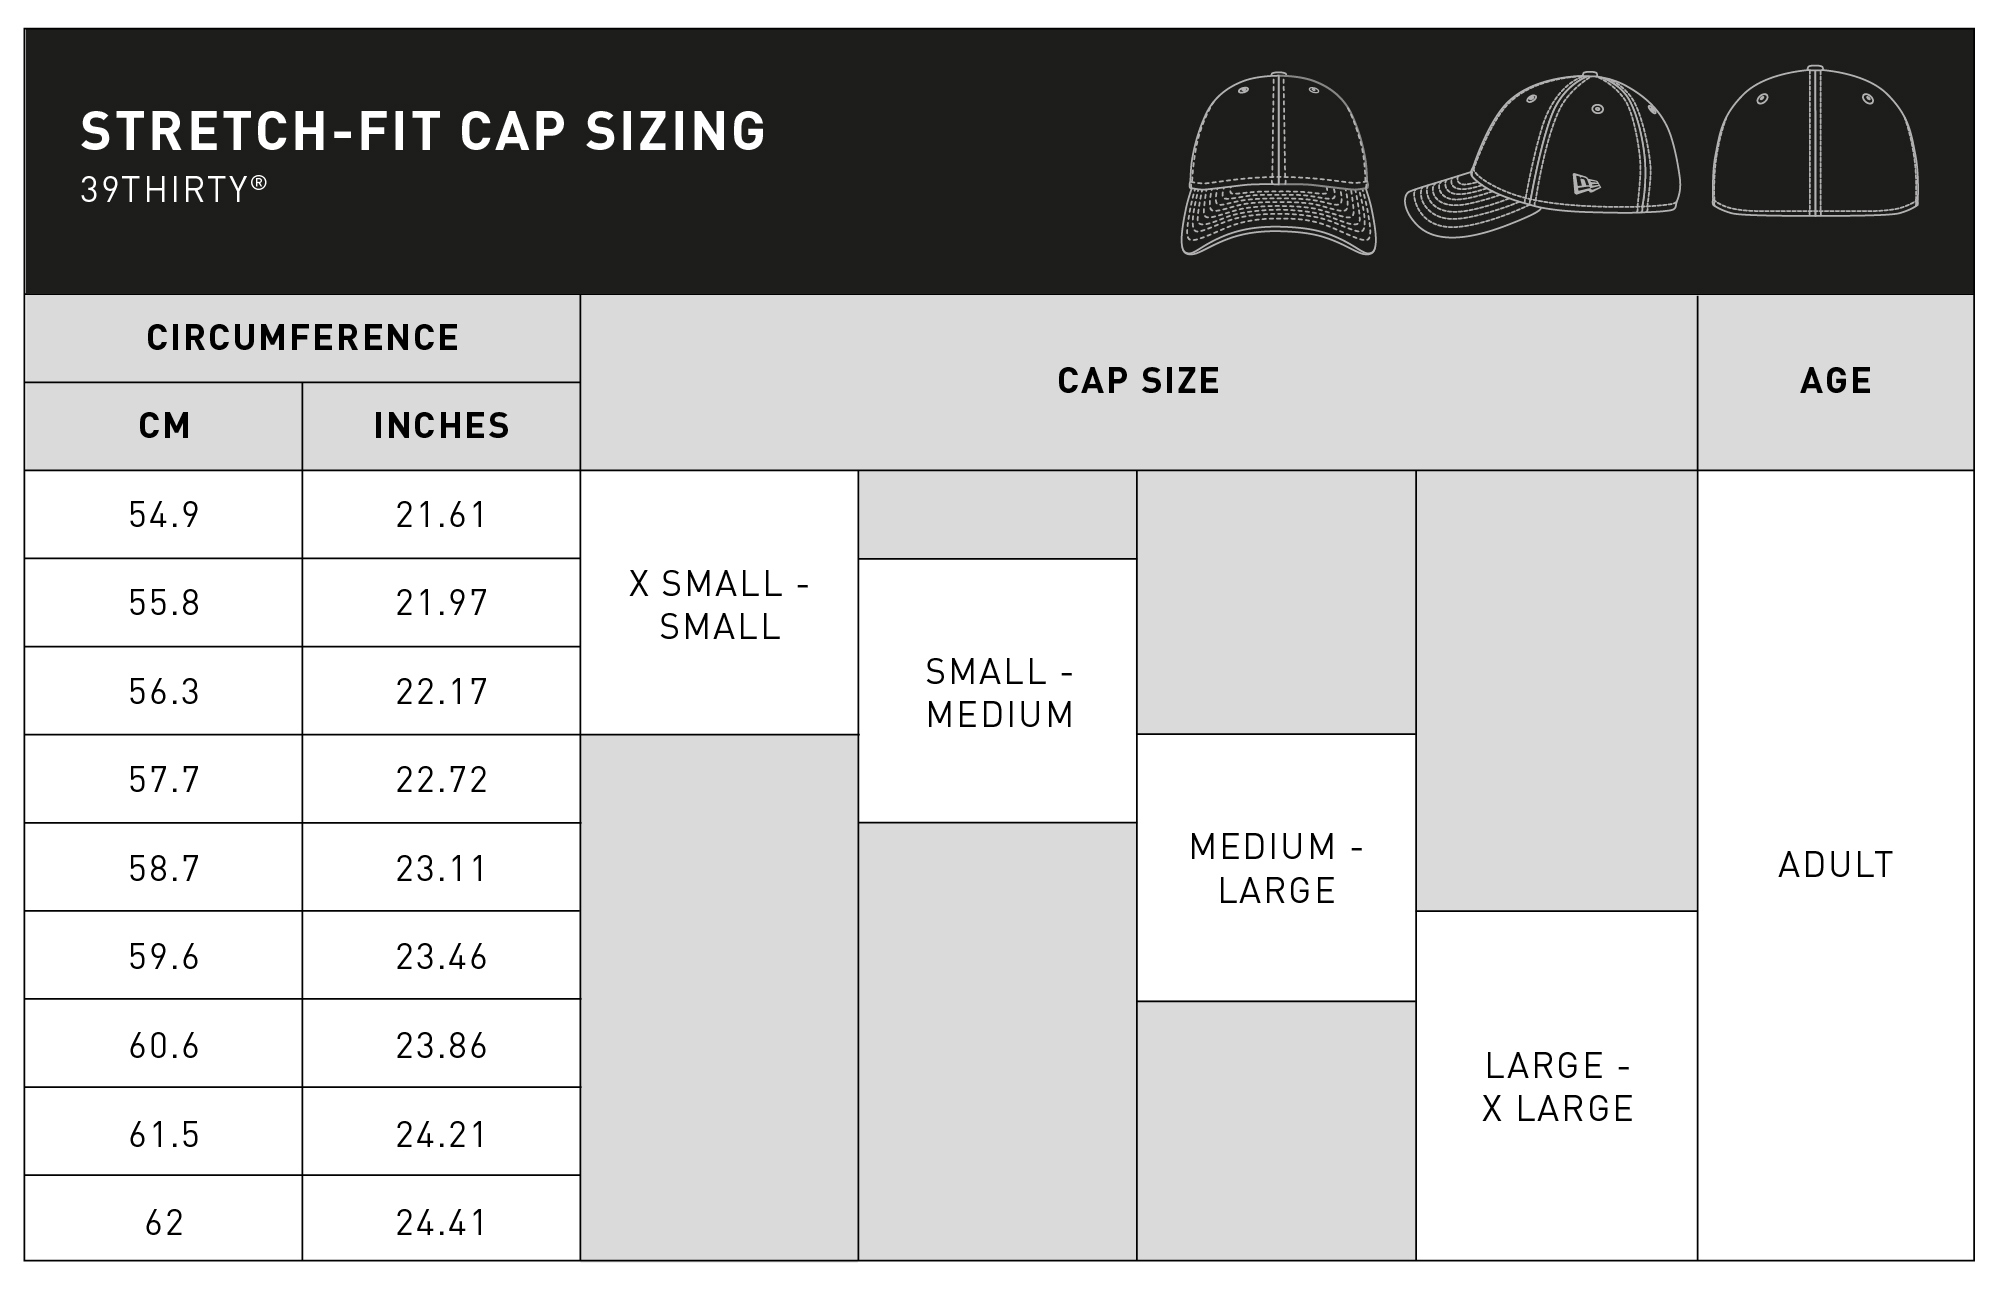 39THIRTY stretch fit caps size guide table for desktop